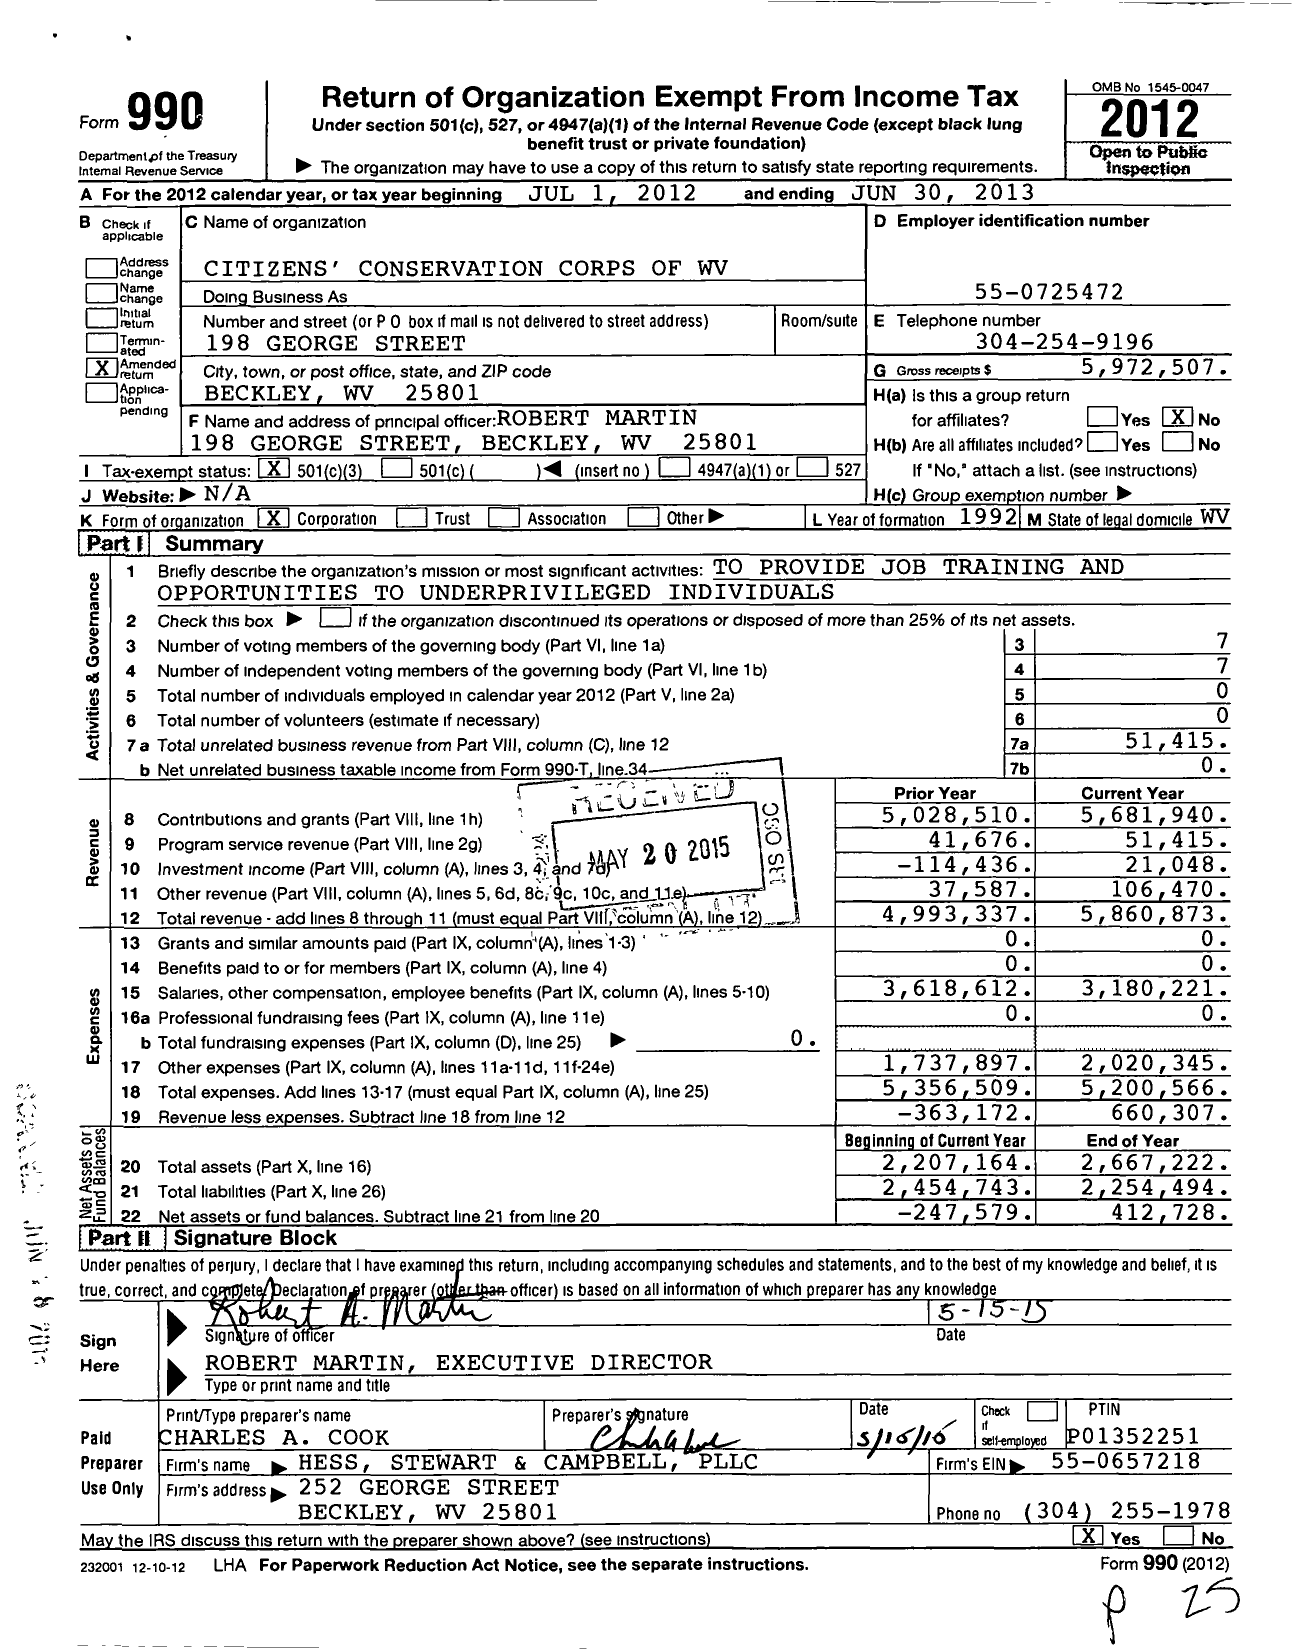 Image of first page of 2012 Form 990 for Citizens' Conservation Corps of WV